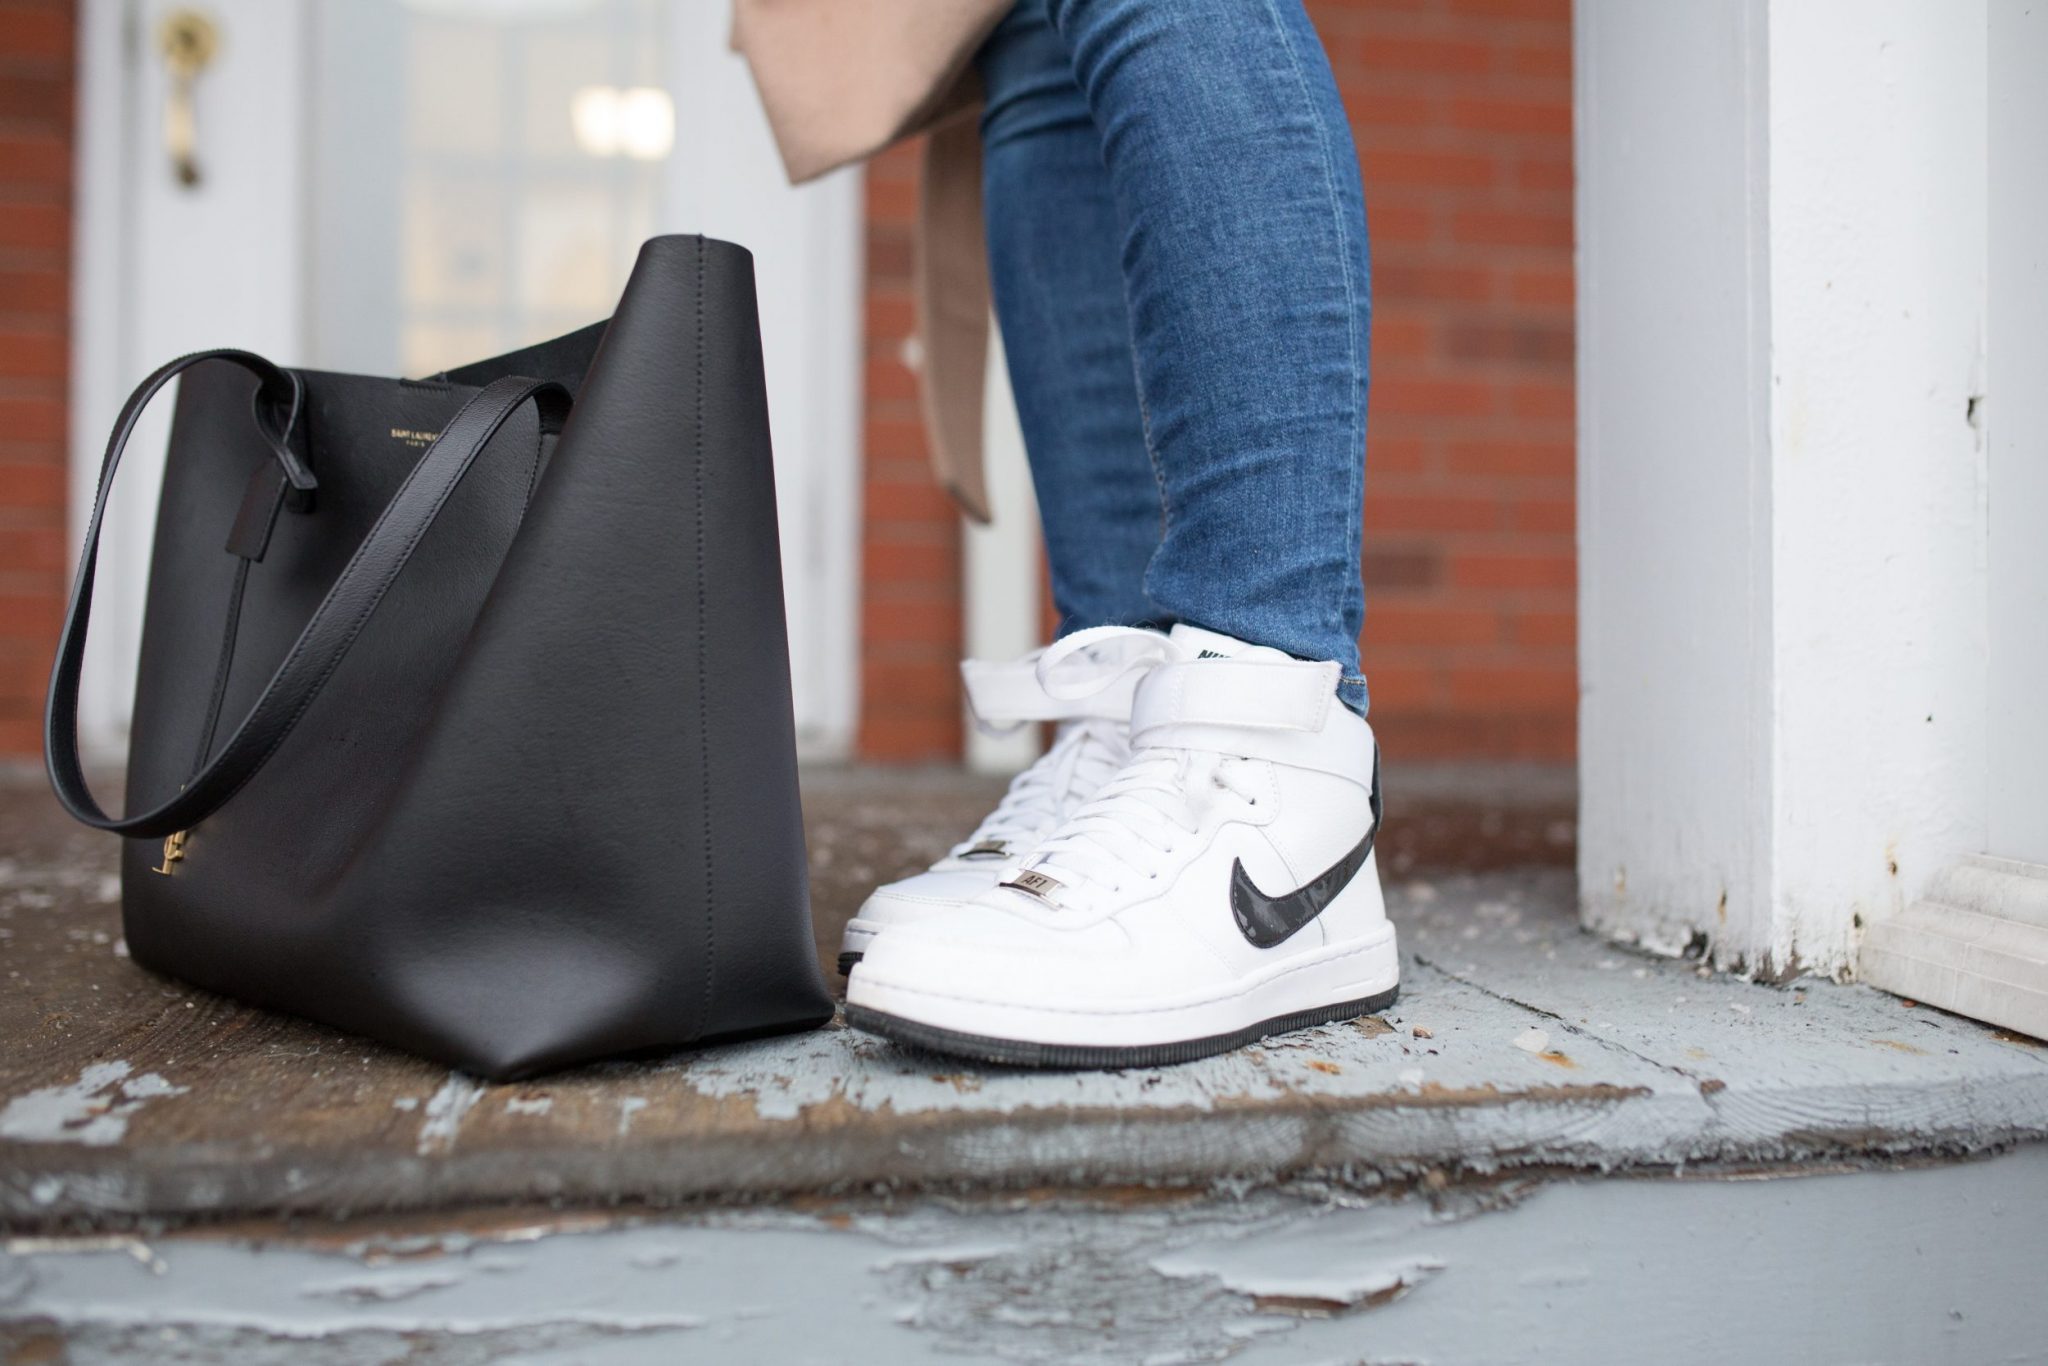 Saint Laurent Shopping Leather Tote and Nike Hi Tops